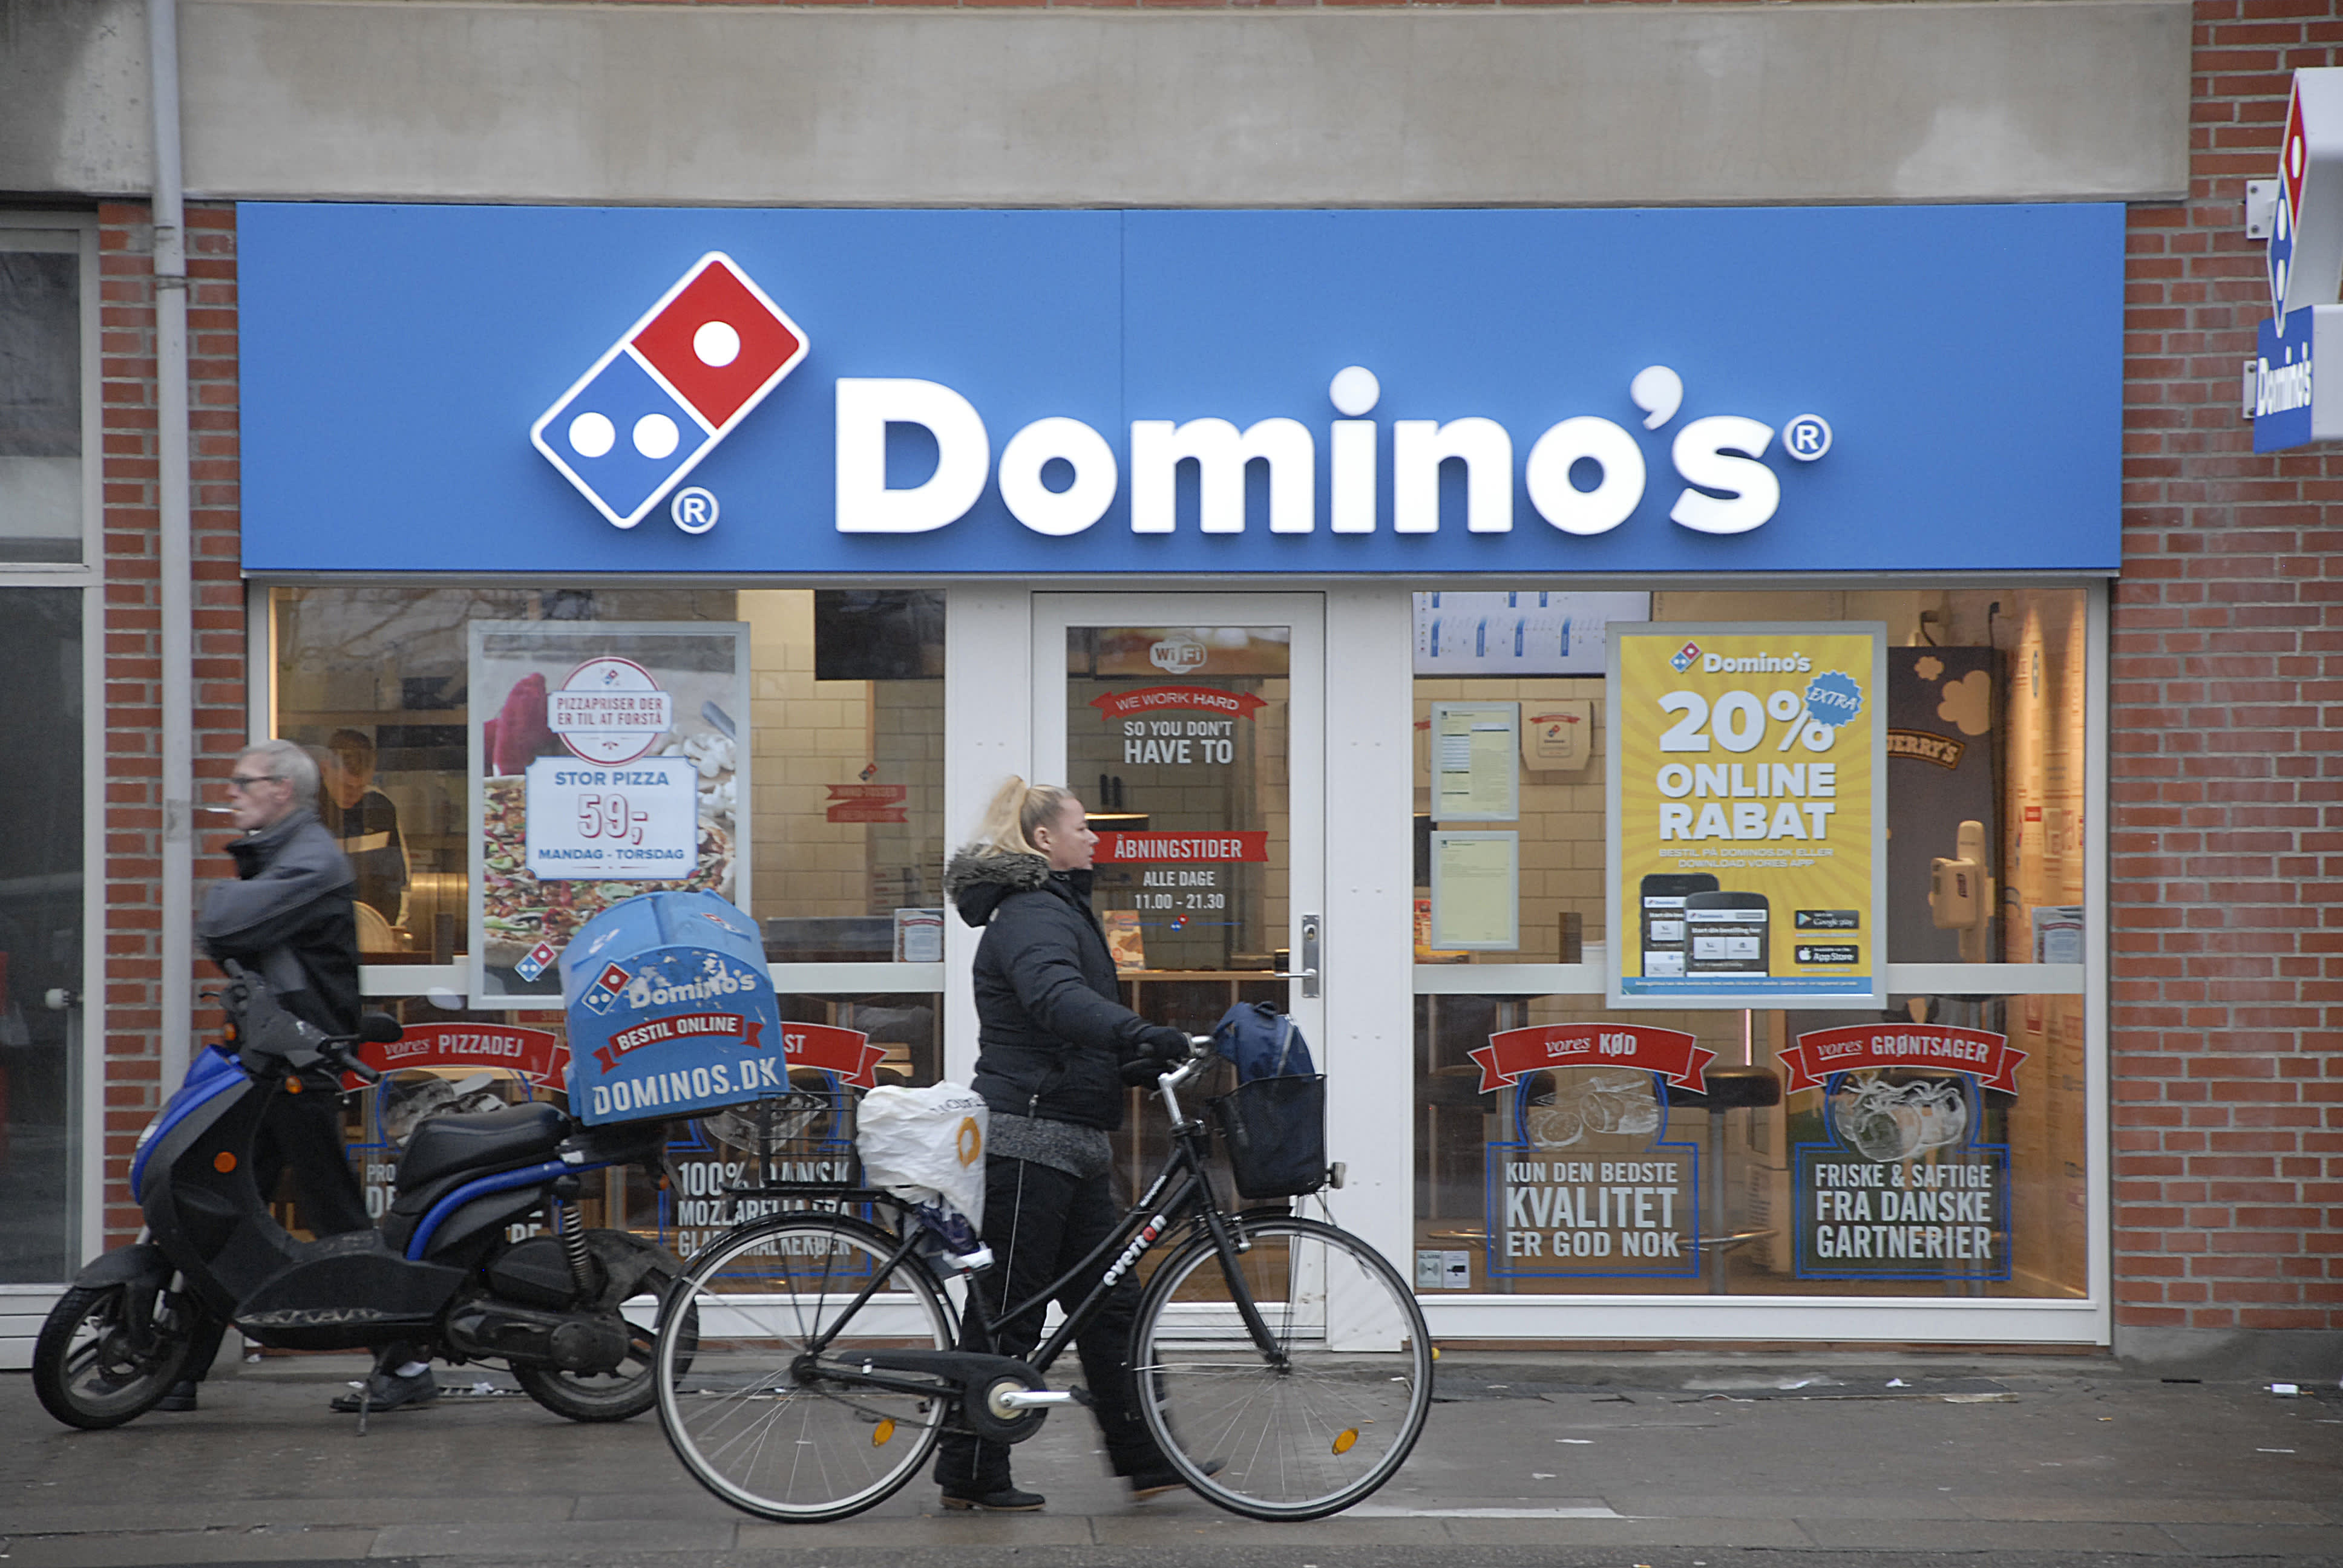 Domino’s (DPZ) 3Q 2021earnings beat